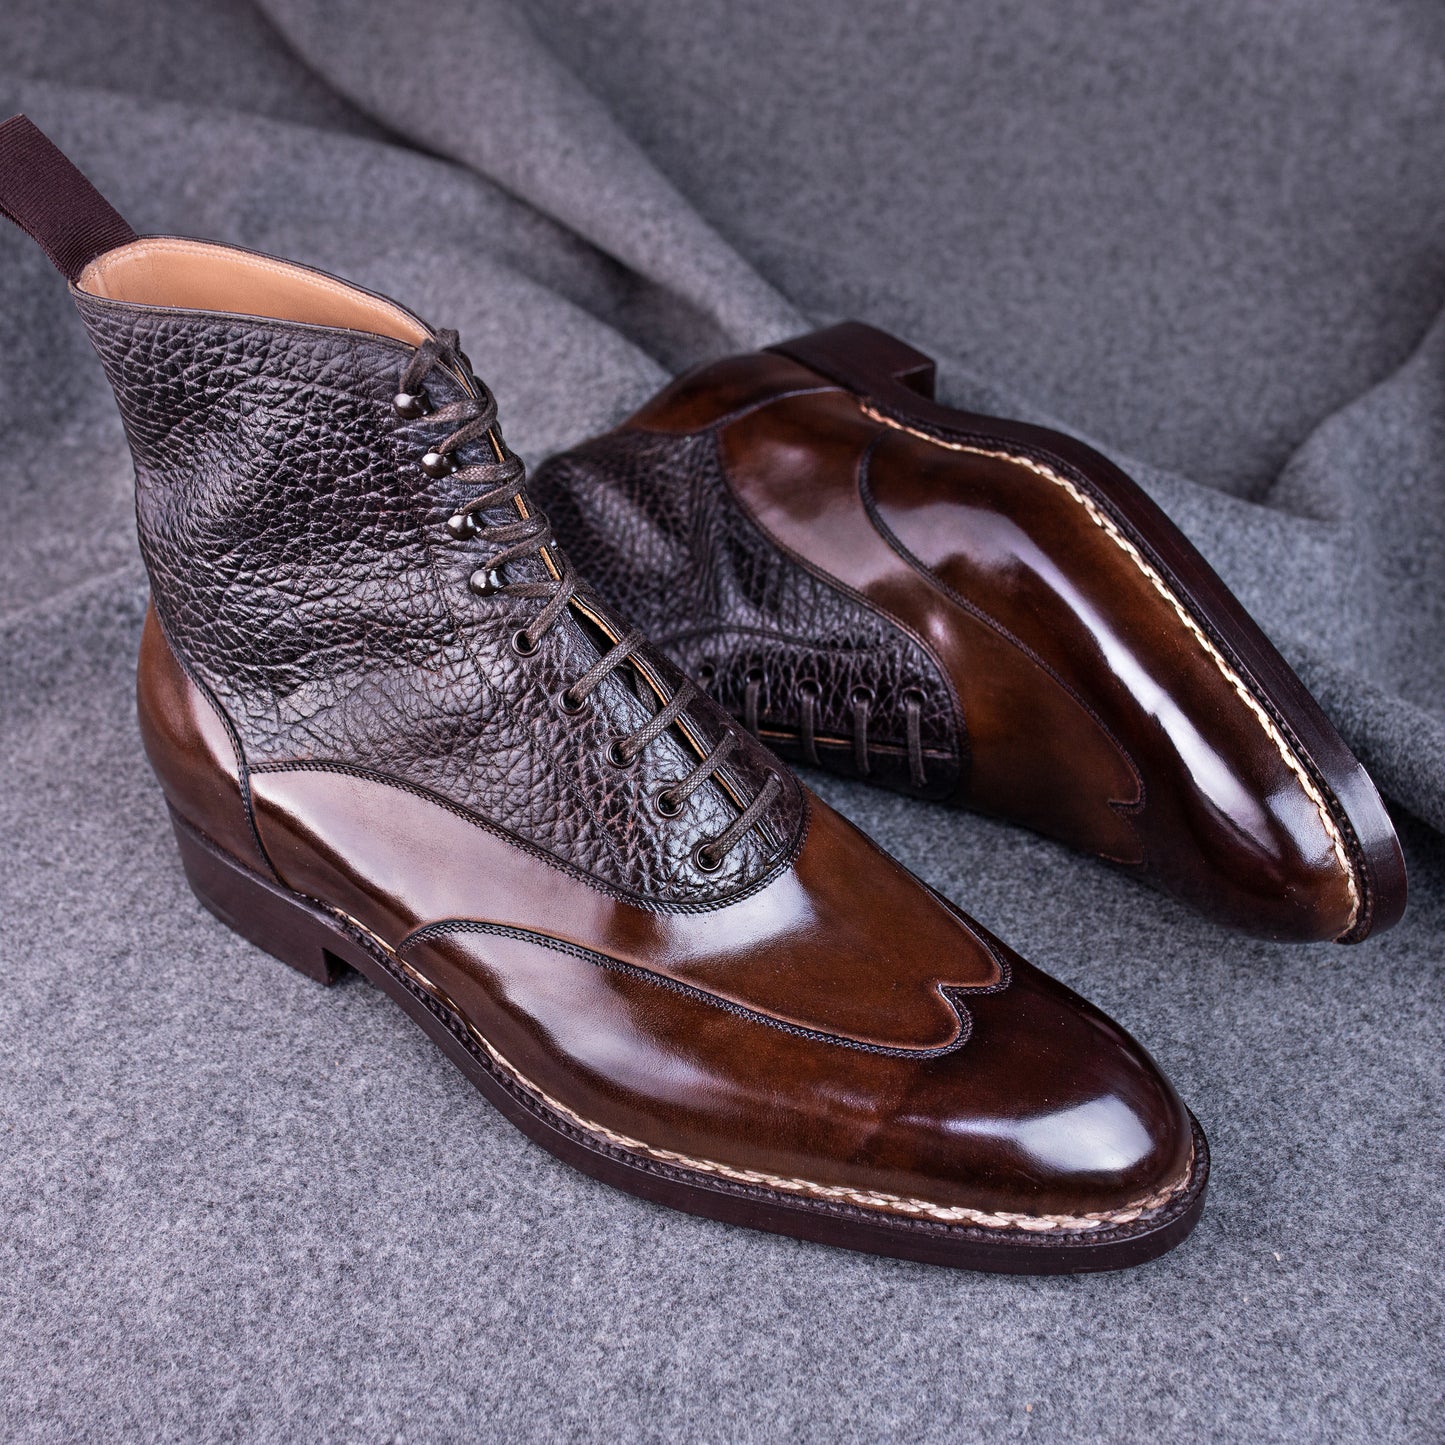 High cut boot, long wing tip with middle tulip cut